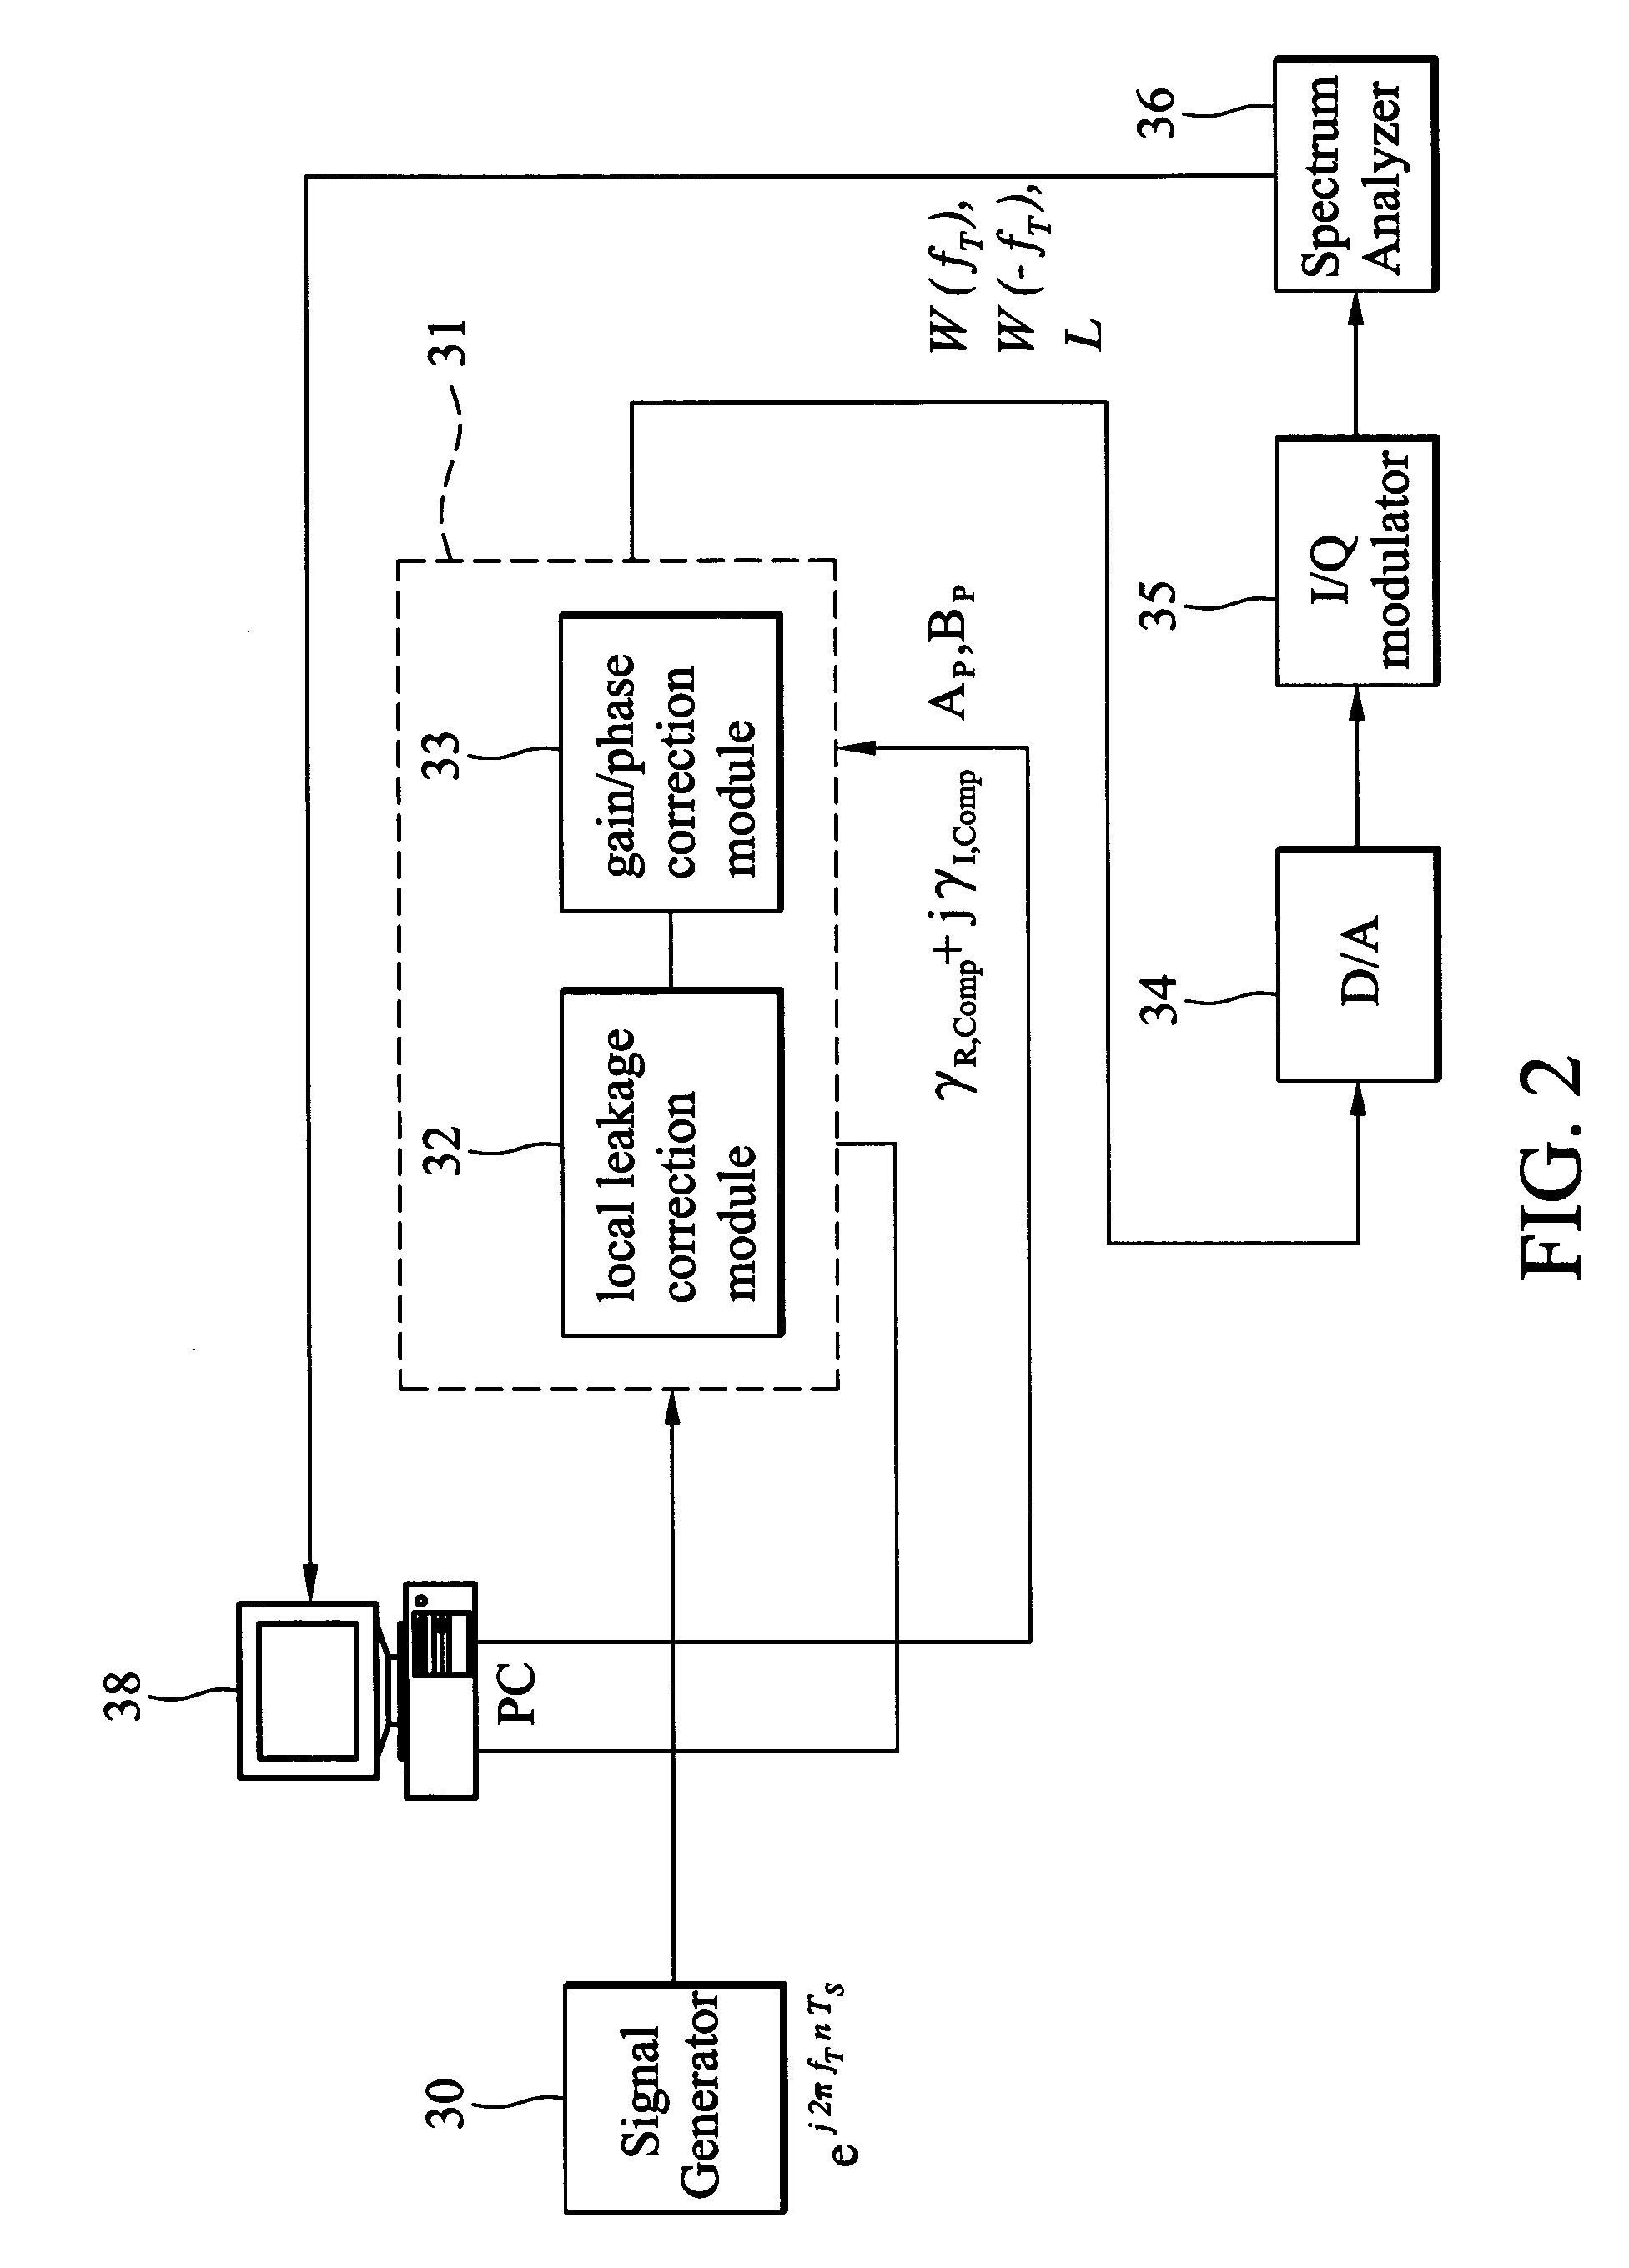 Method and appatatus for I/Q mismatch calibration of transmitter